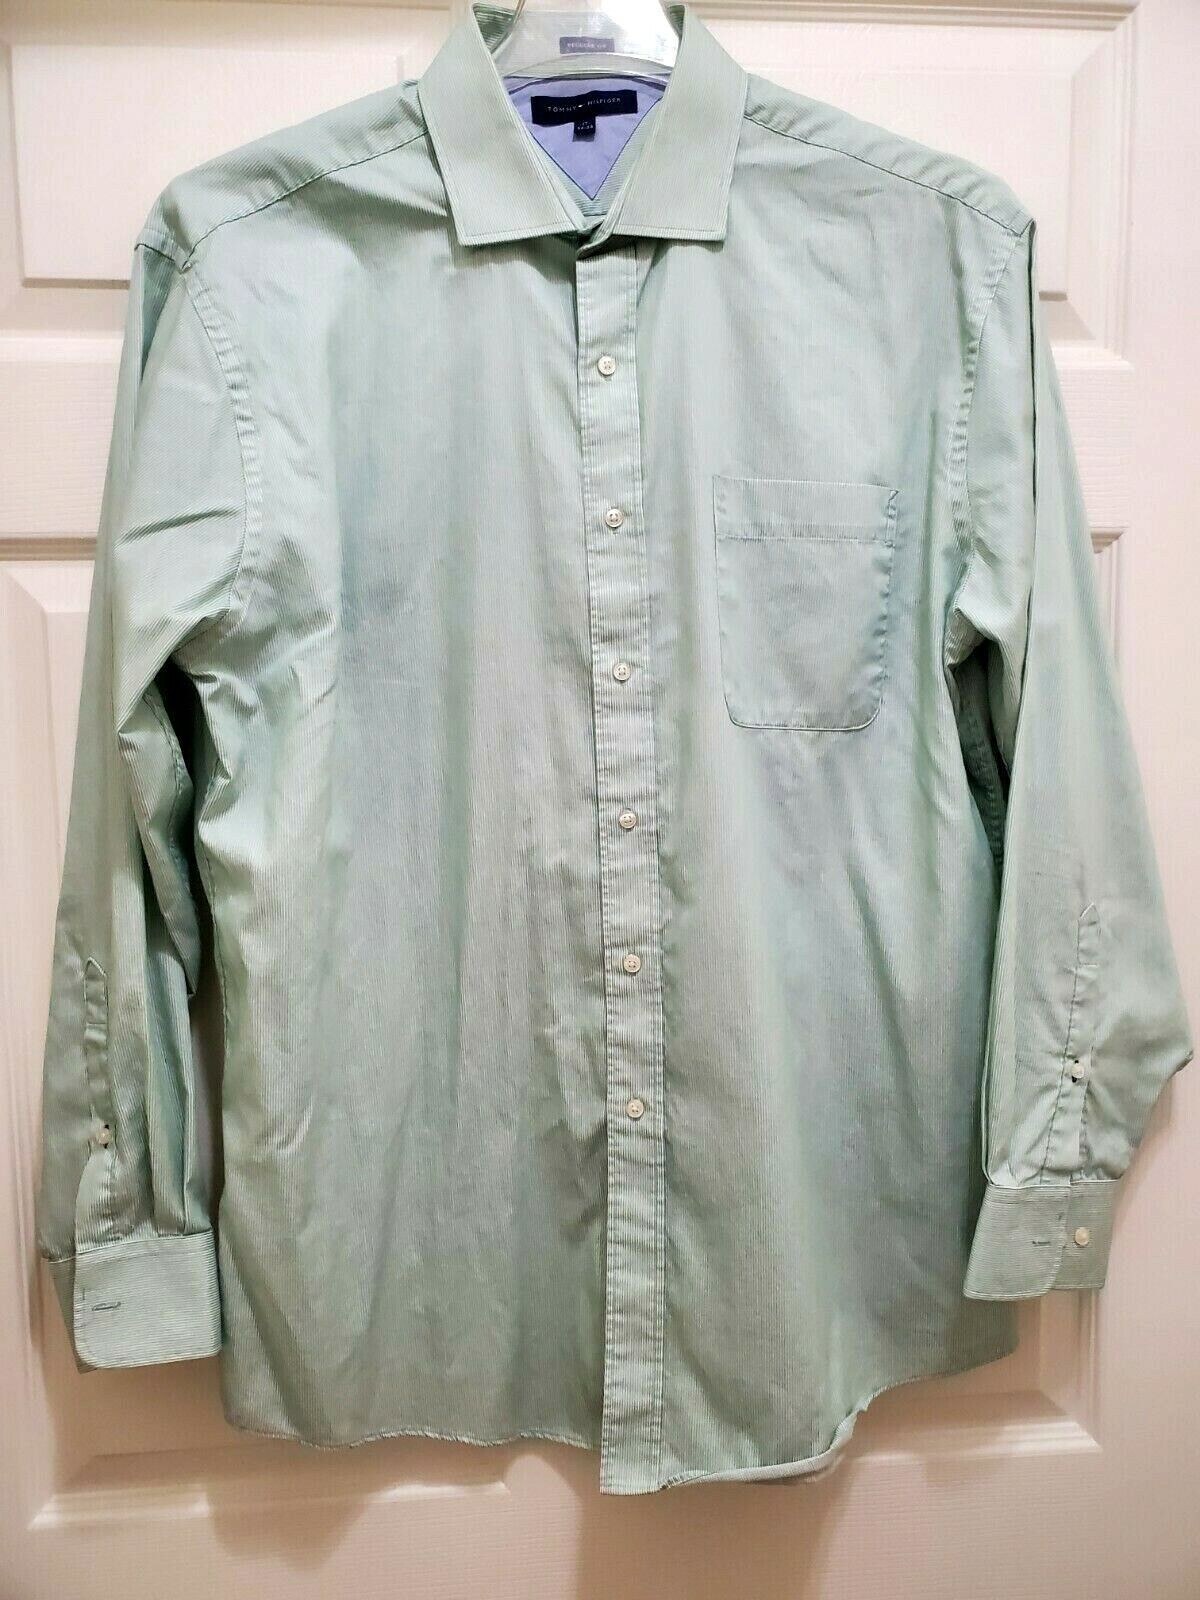 Primary image for Tommy Hilfiger Men's Size L 34-35 3 Long-Sleeve Dress Shirt Green White